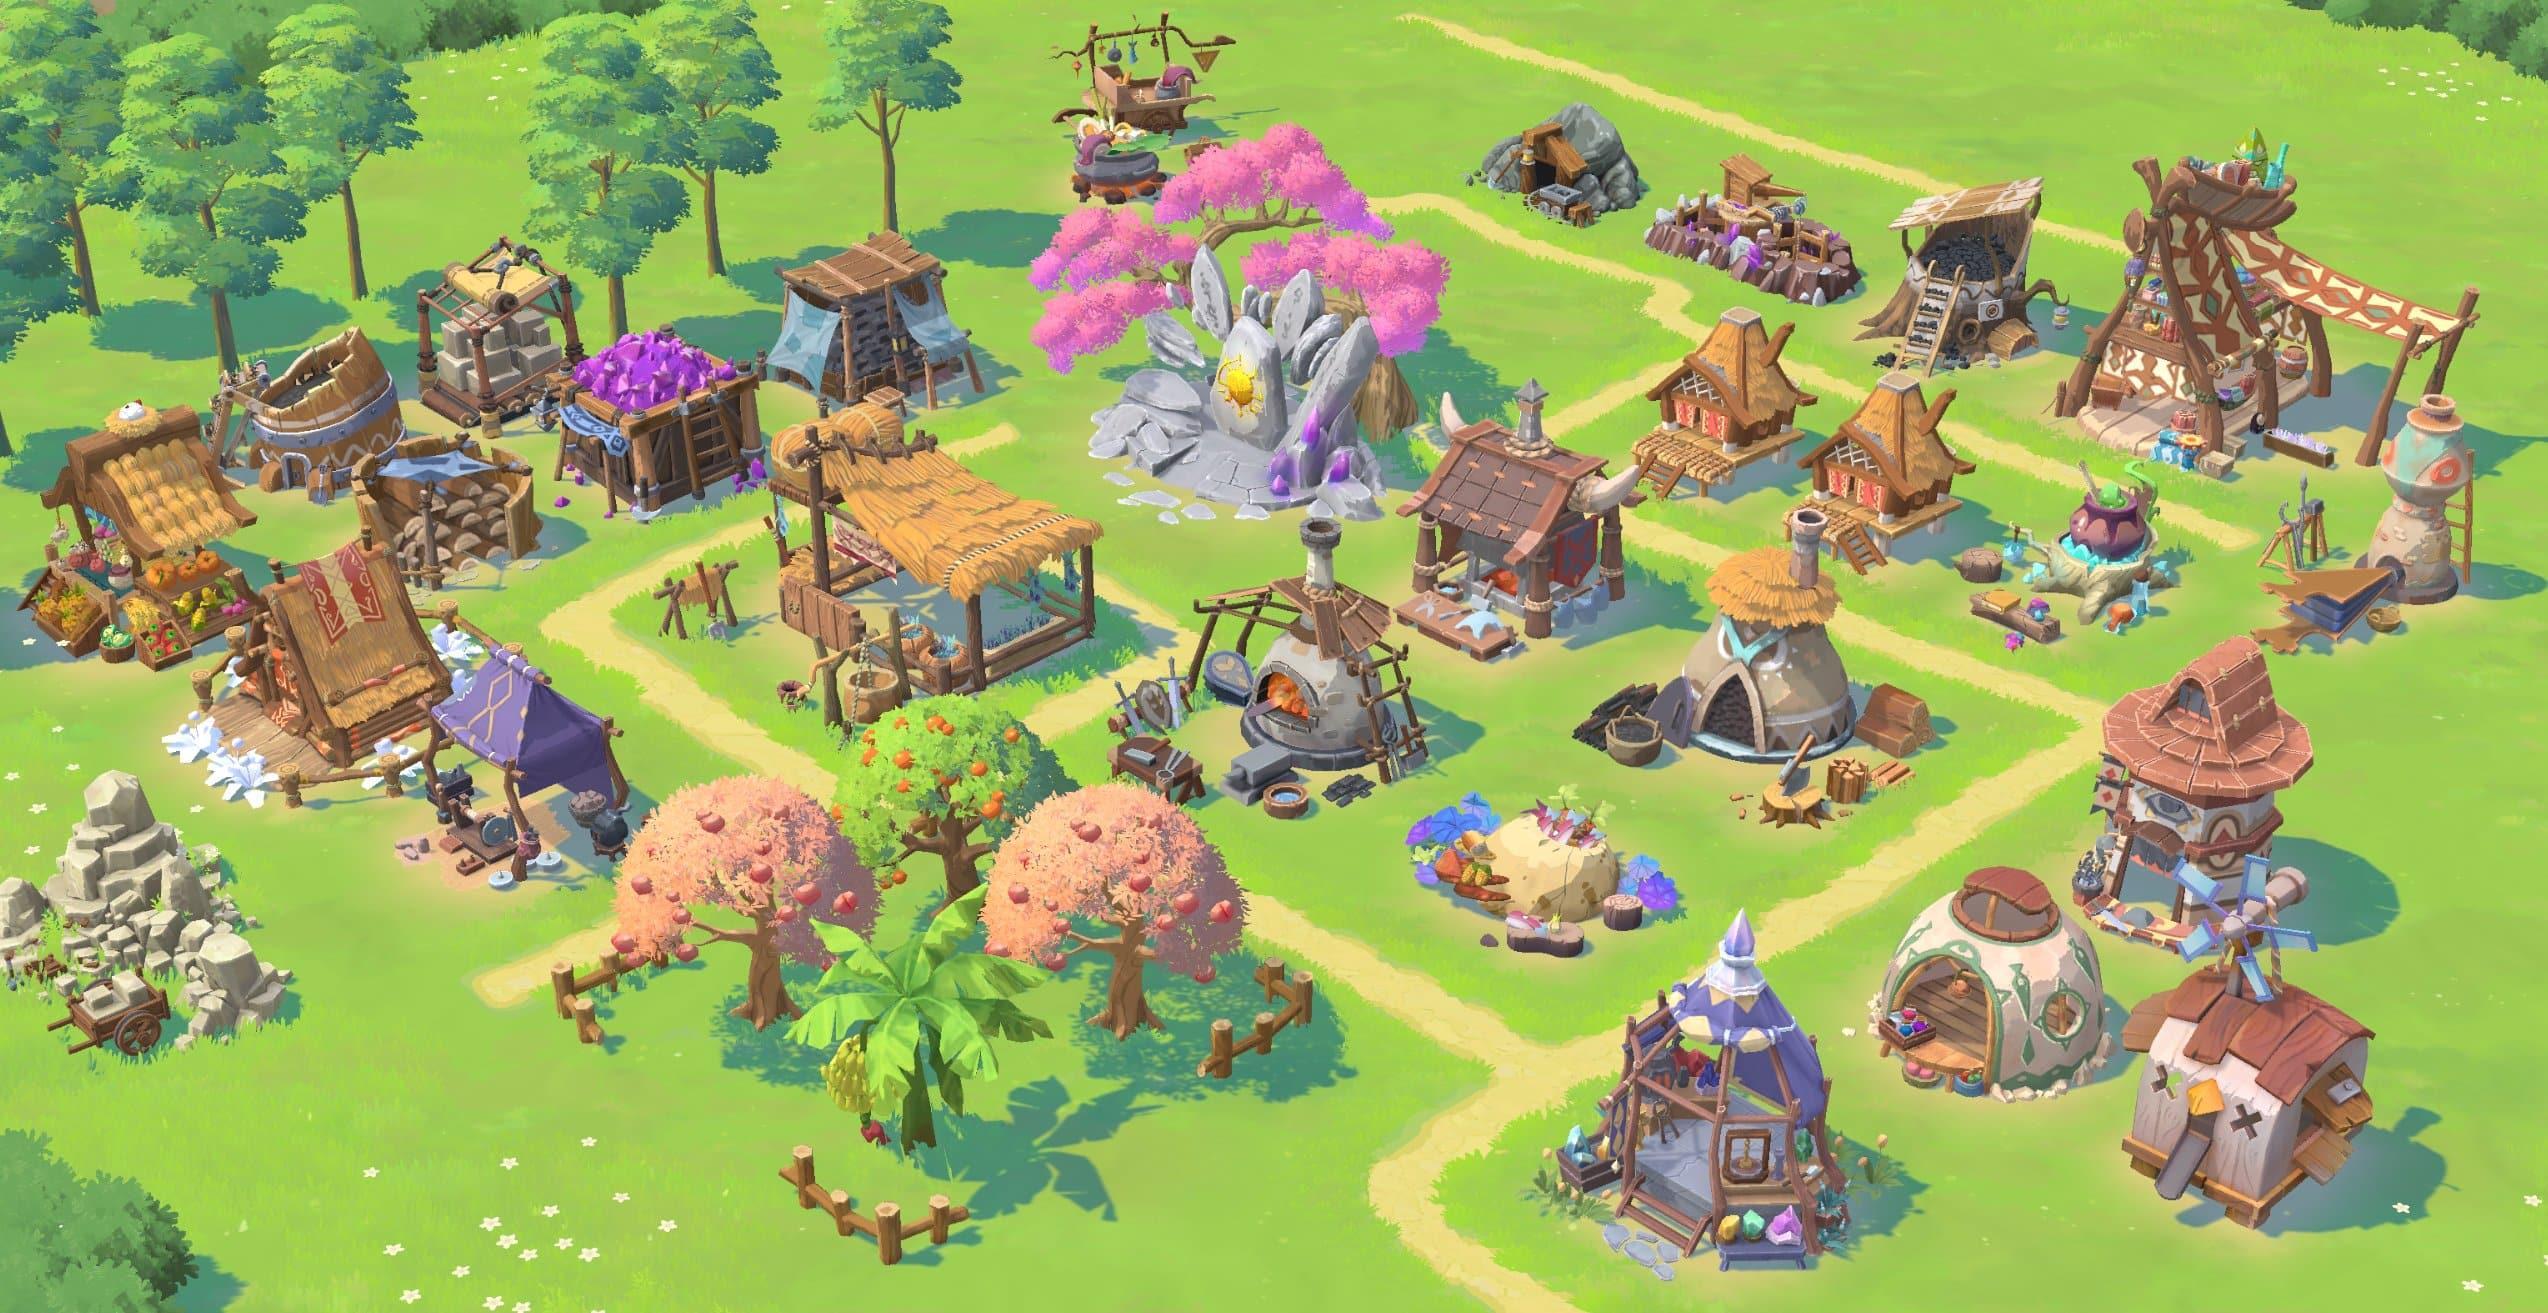 The premier WEB3 game giant Axie Infinity has released a new extension game Homeland, establishing settlements in NFT Lunacia world